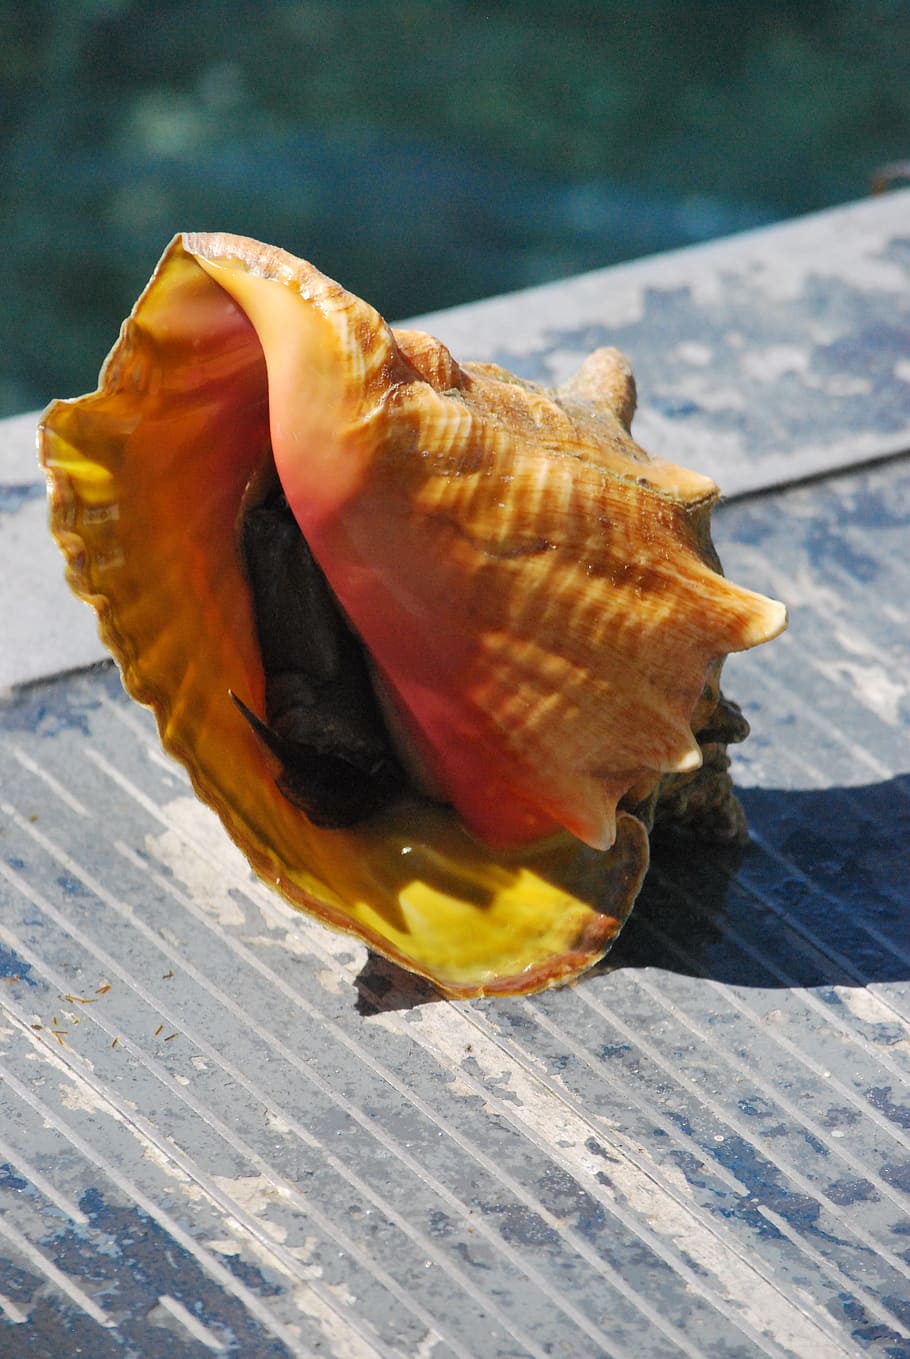 Seashell, Carribean, Conch, Mollusk, close-up, outdoors, animal themes, one animal, animals in the wild, animal wildlife